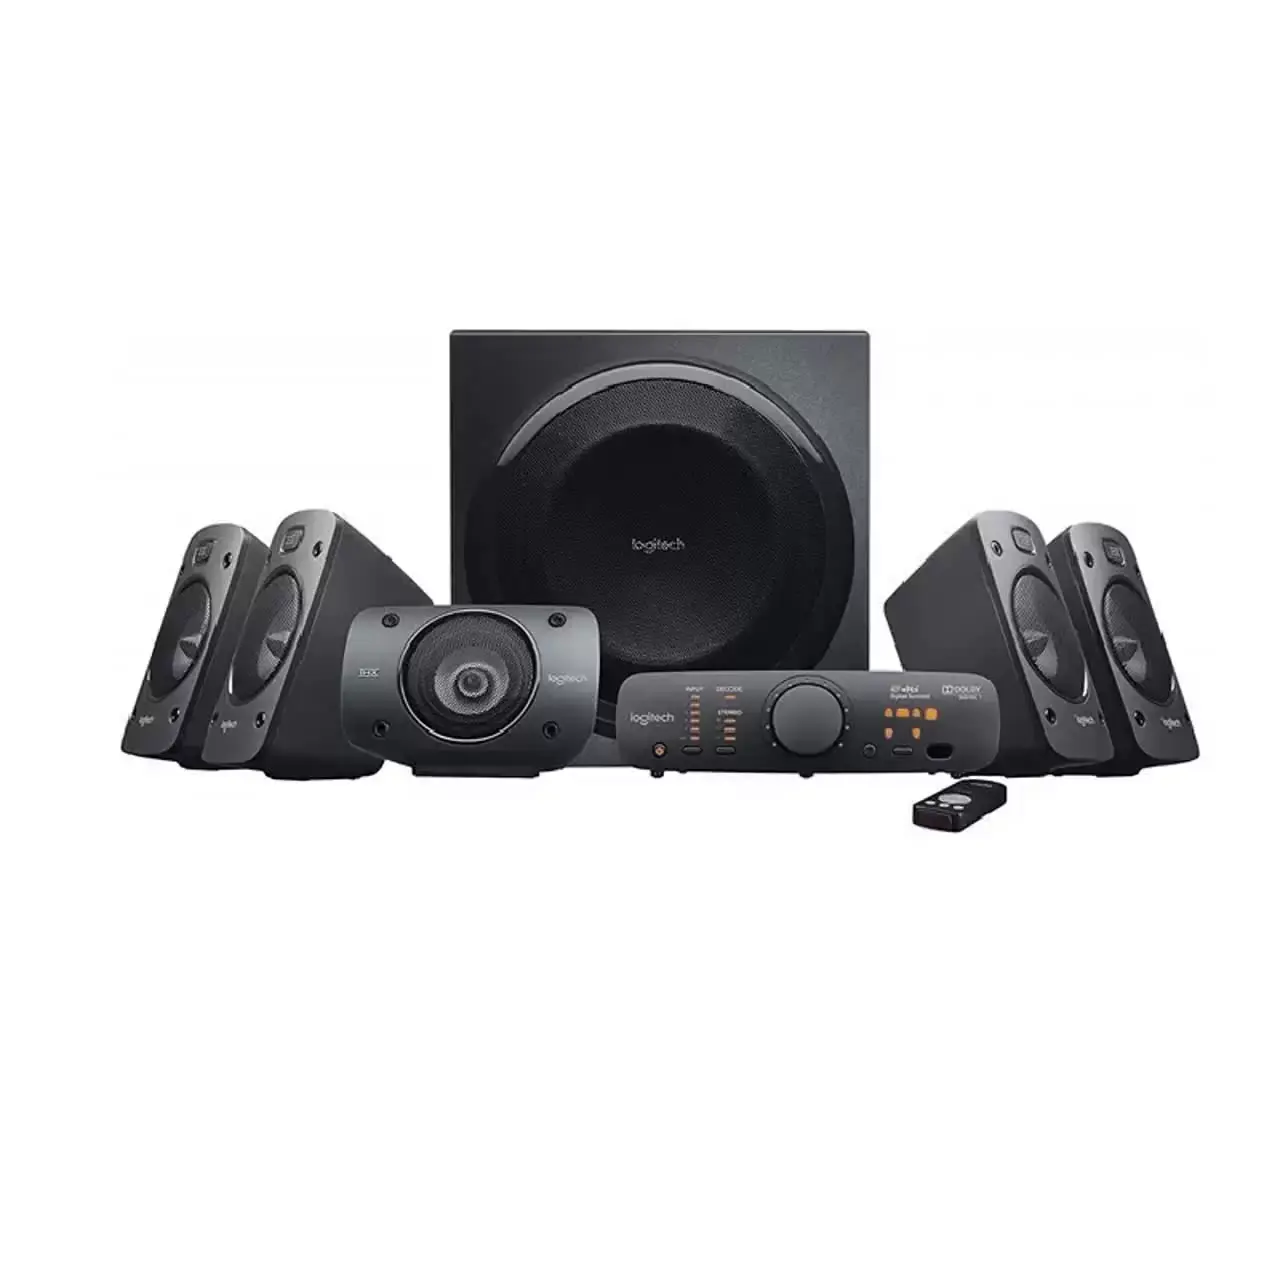 Logitech Z906 5.1 Surround Sound Speakers System Home Theater Subwoofer Speaker Combination